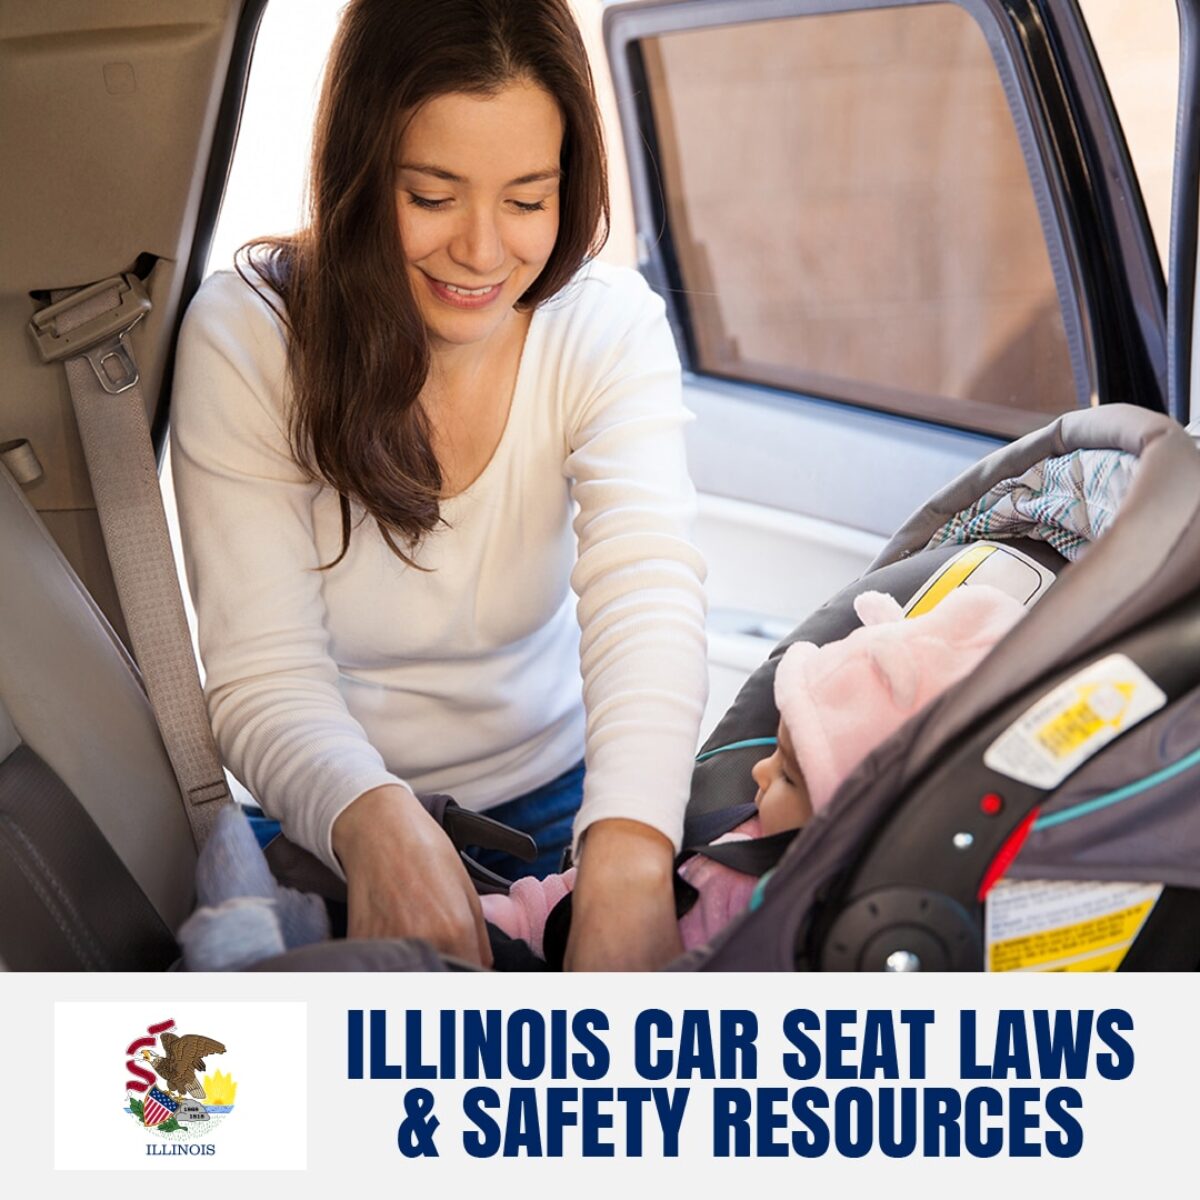 Illinois Car Seat Booster Laws